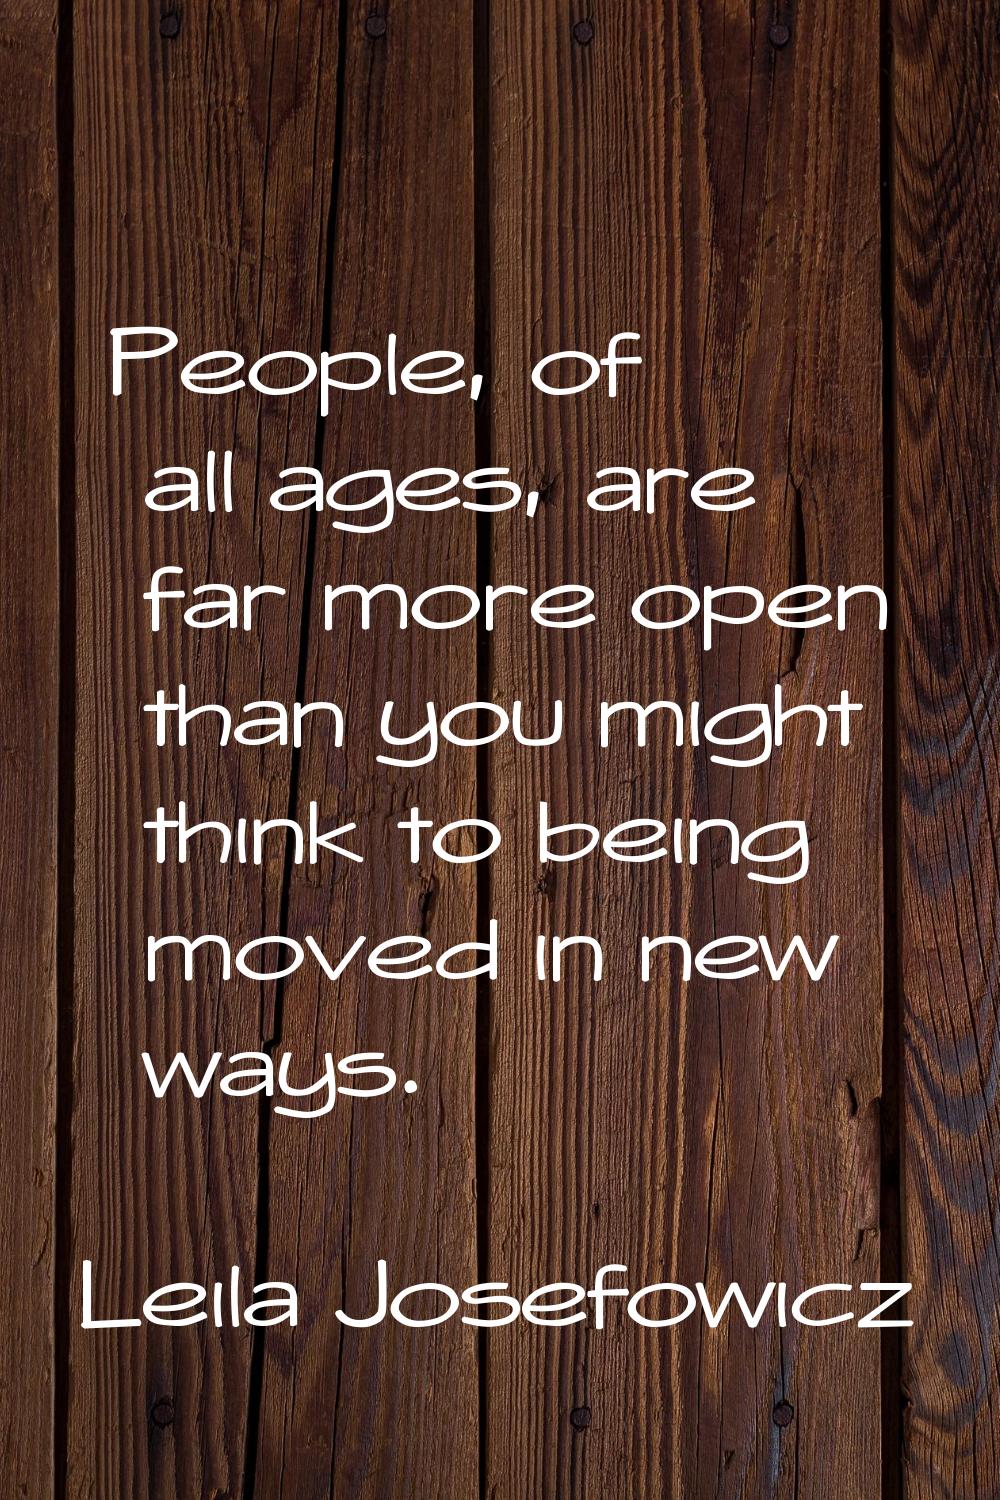 People, of all ages, are far more open than you might think to being moved in new ways.